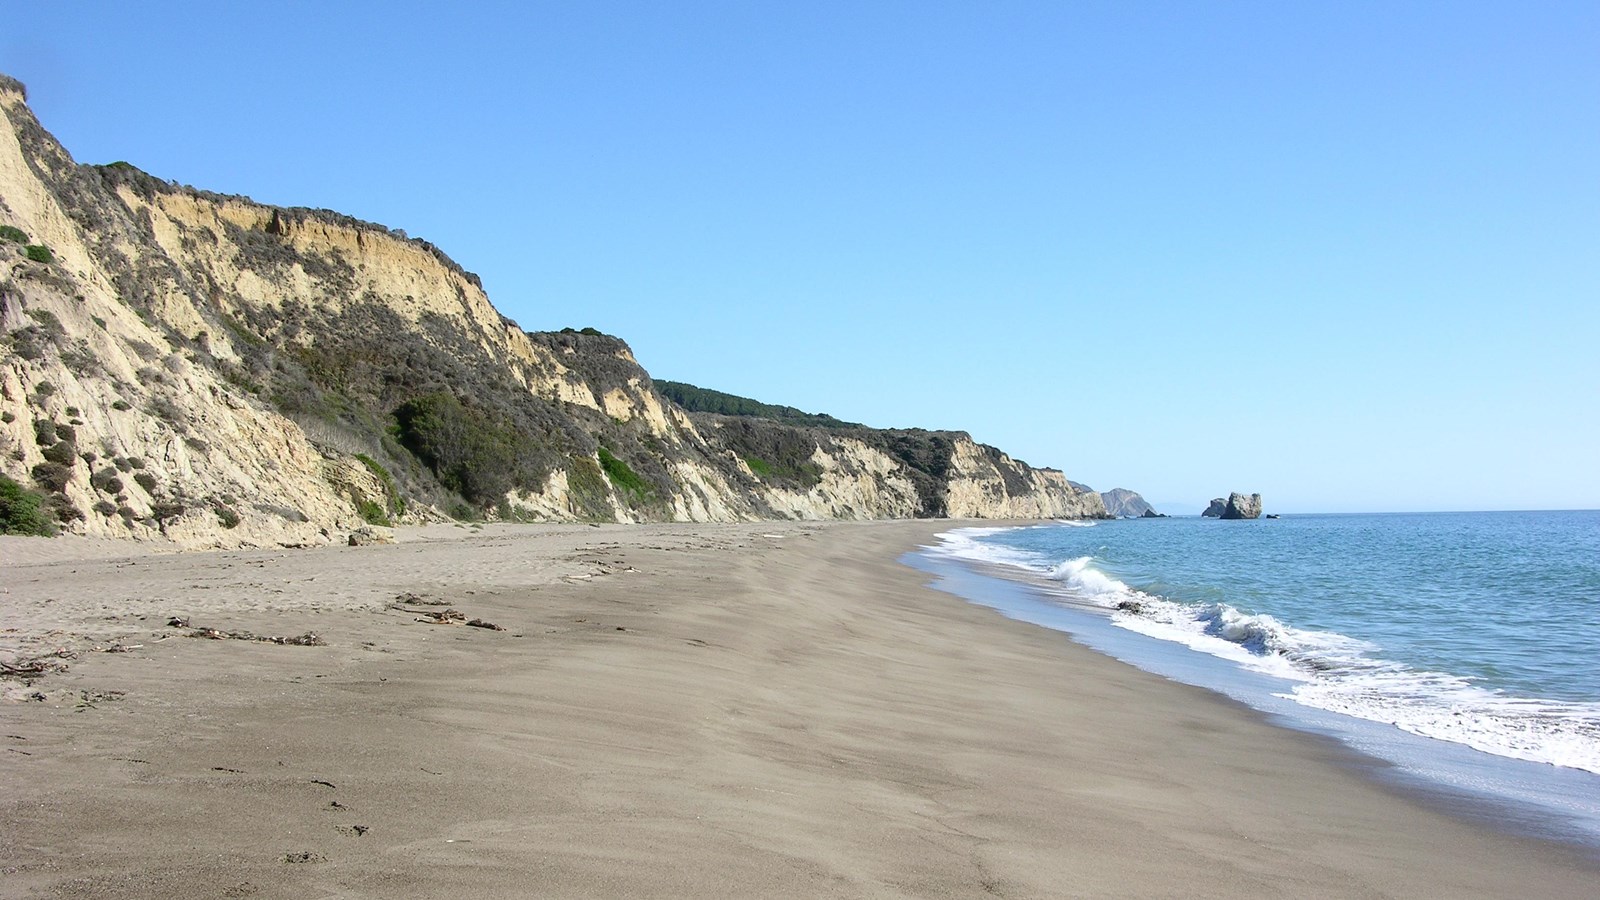 A wave washes in from the right onto a sandy beach at the base of beige-colored bluffs on the left.